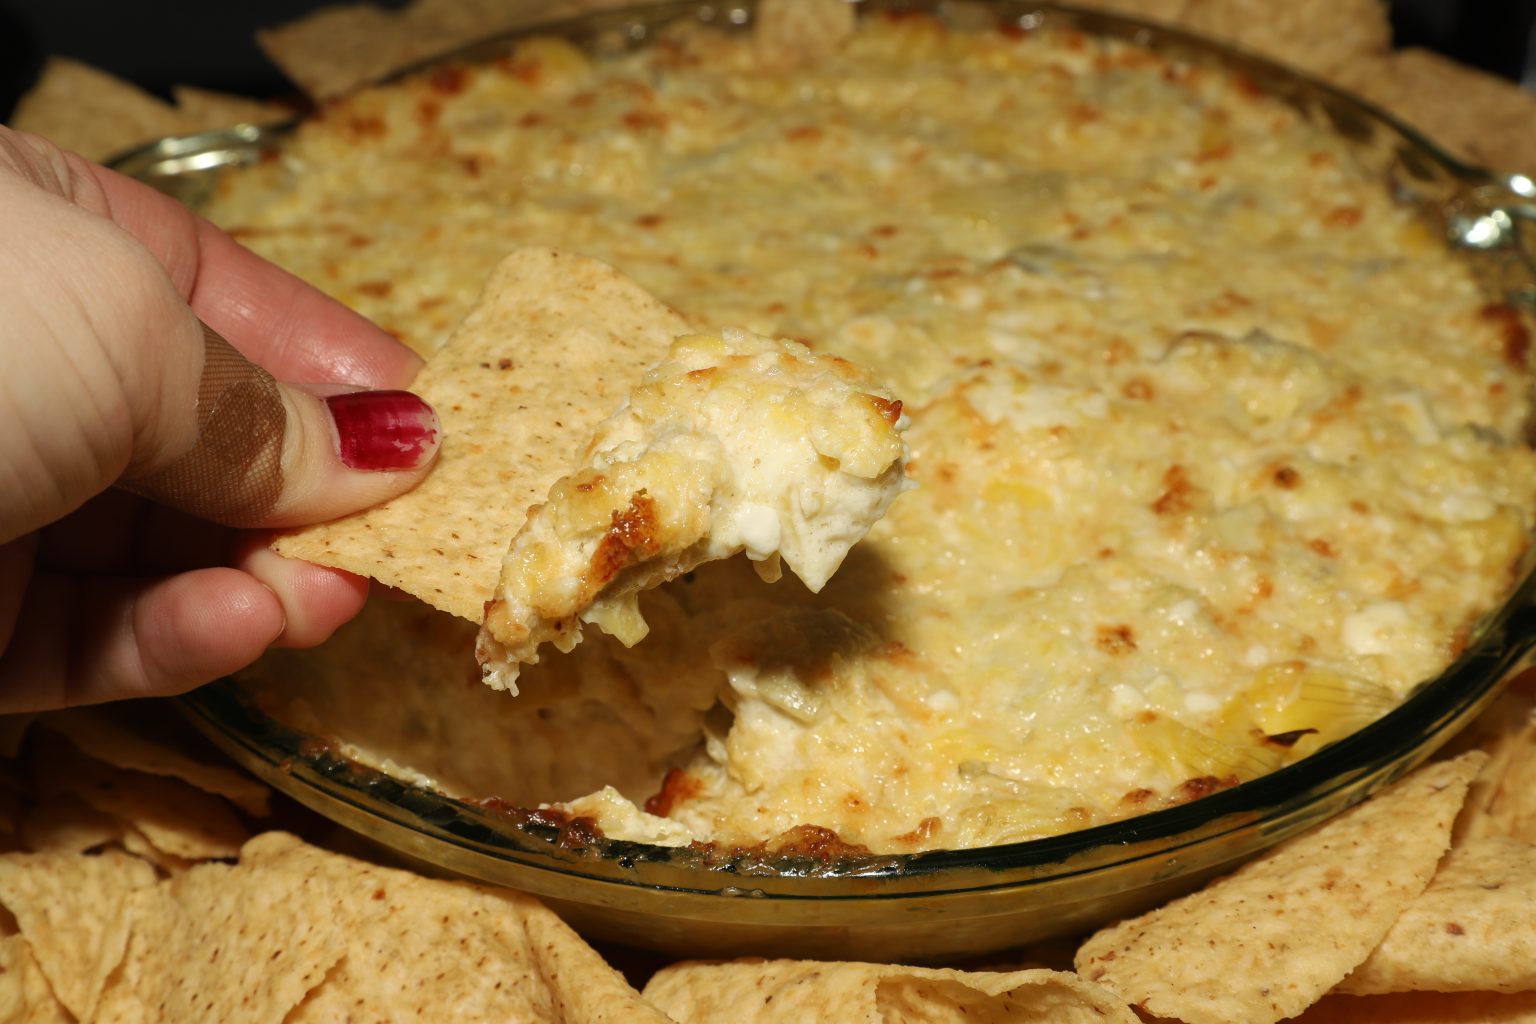 The Pioneer Woman S Hot Artichoke Dip For The Love Of Food